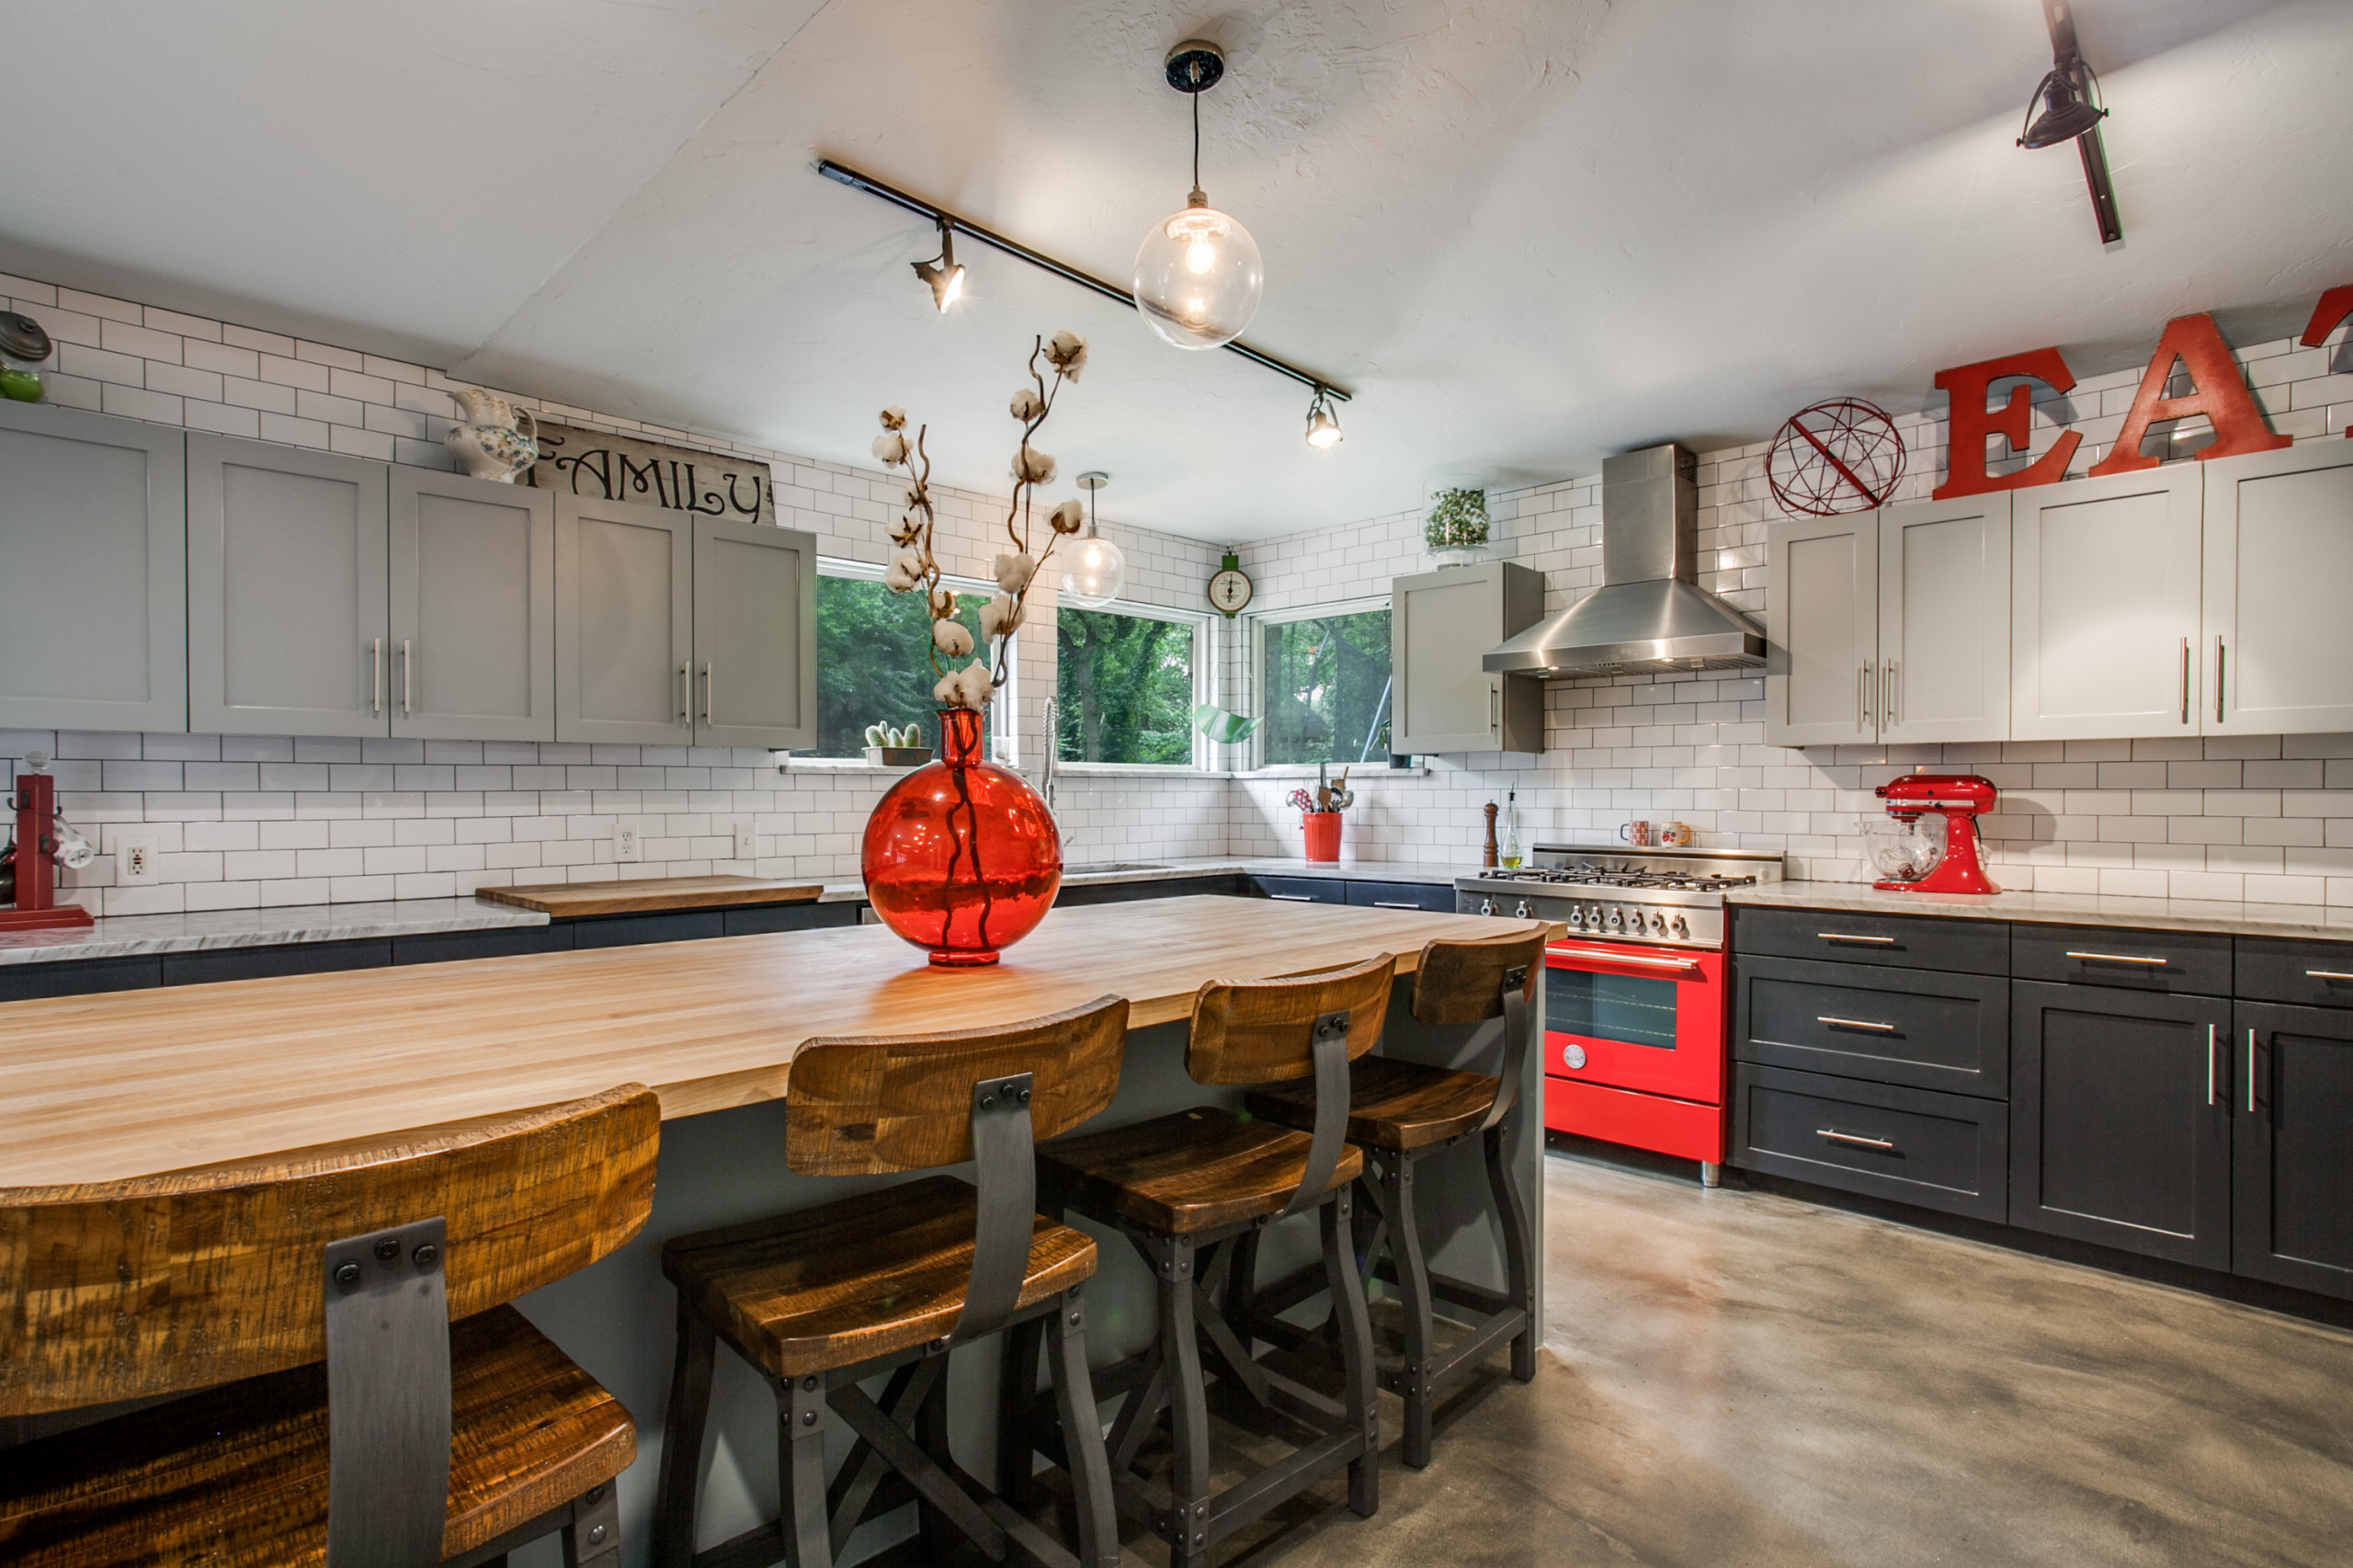 Reclaimed Eclectic Kitchen